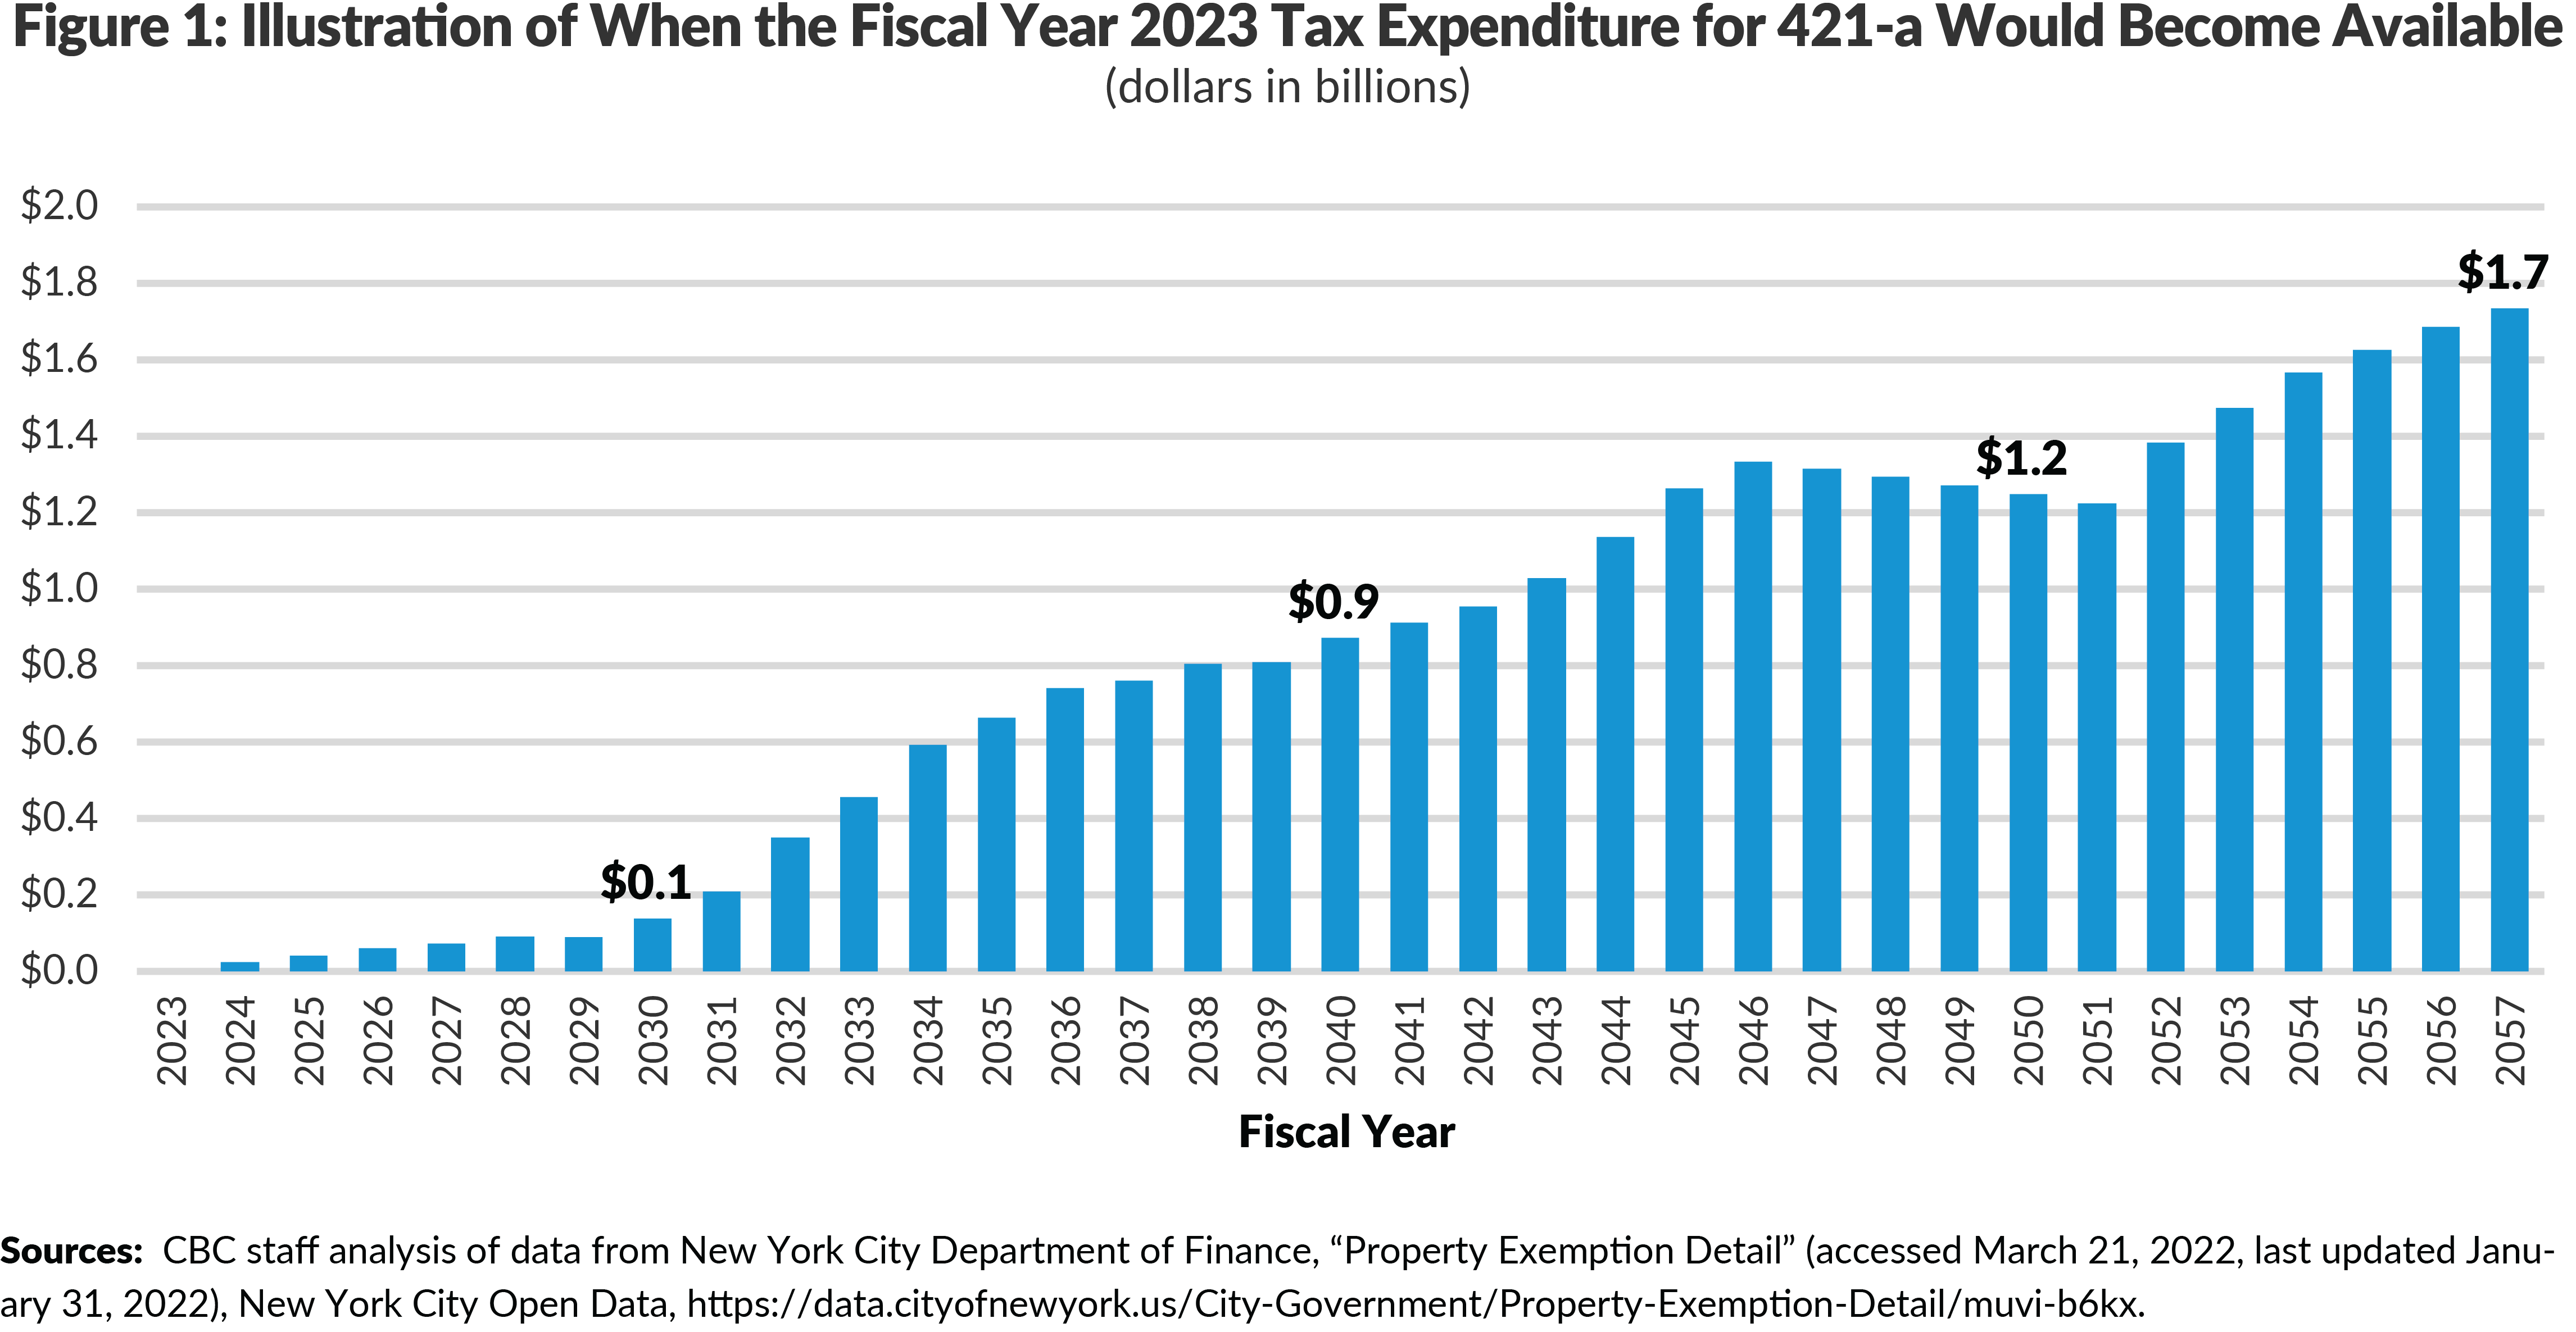 Figure 1: Illustration of When the Fiscal Year 2023 Tax Expenditure for 421-a Would Become Available